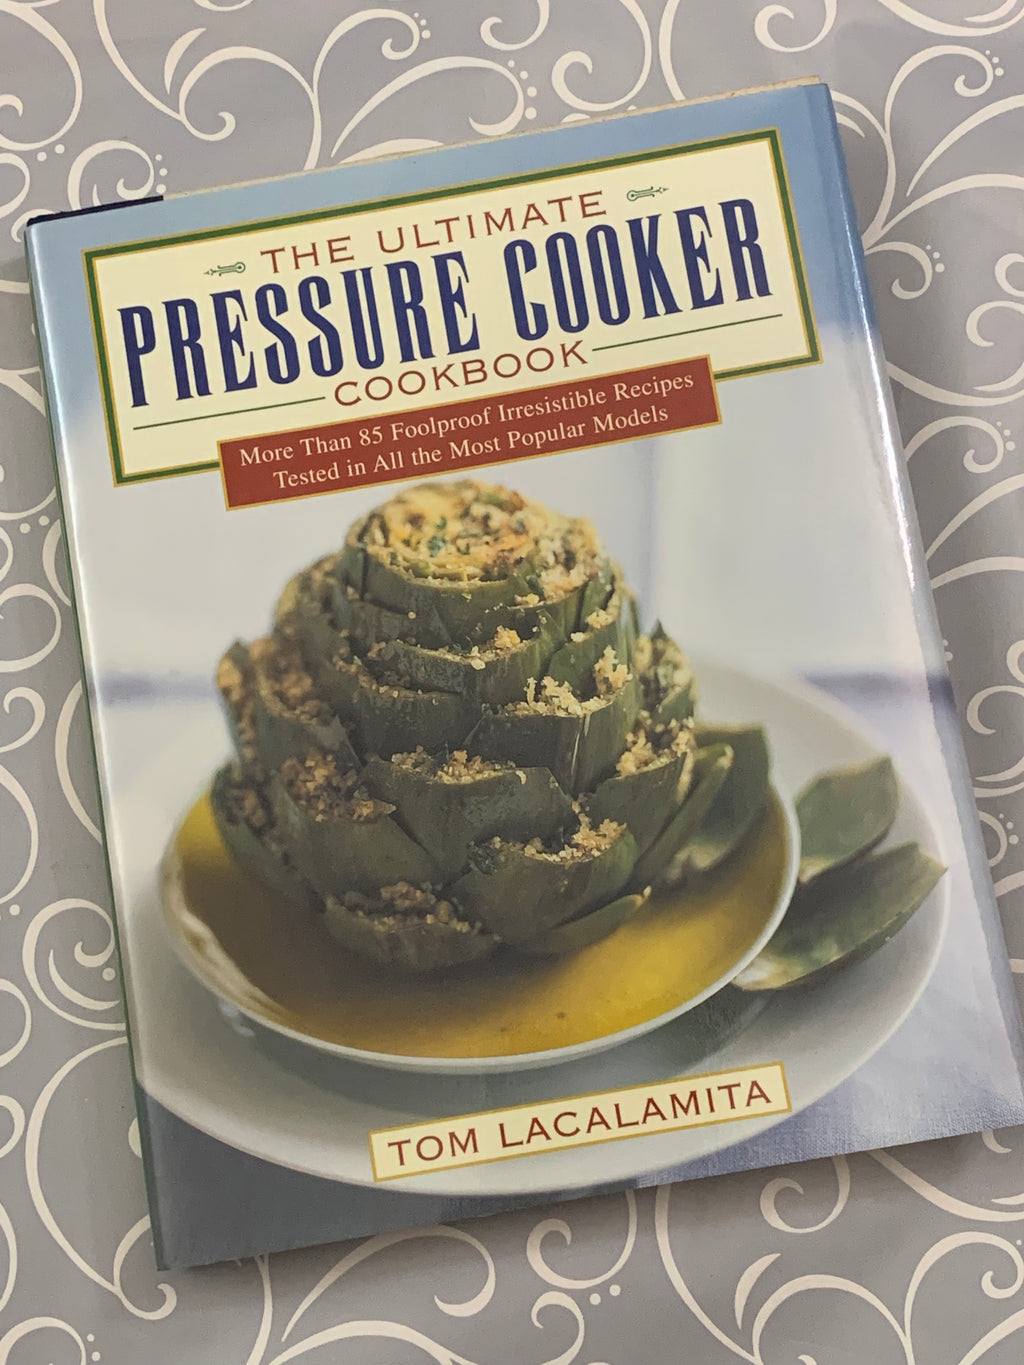 The Ultimate Pressure Cooker Cookbook: More Than 85 Foolproof Irresistible Recipes Tested in All the Most Popular Models- By Tom Lacalamita